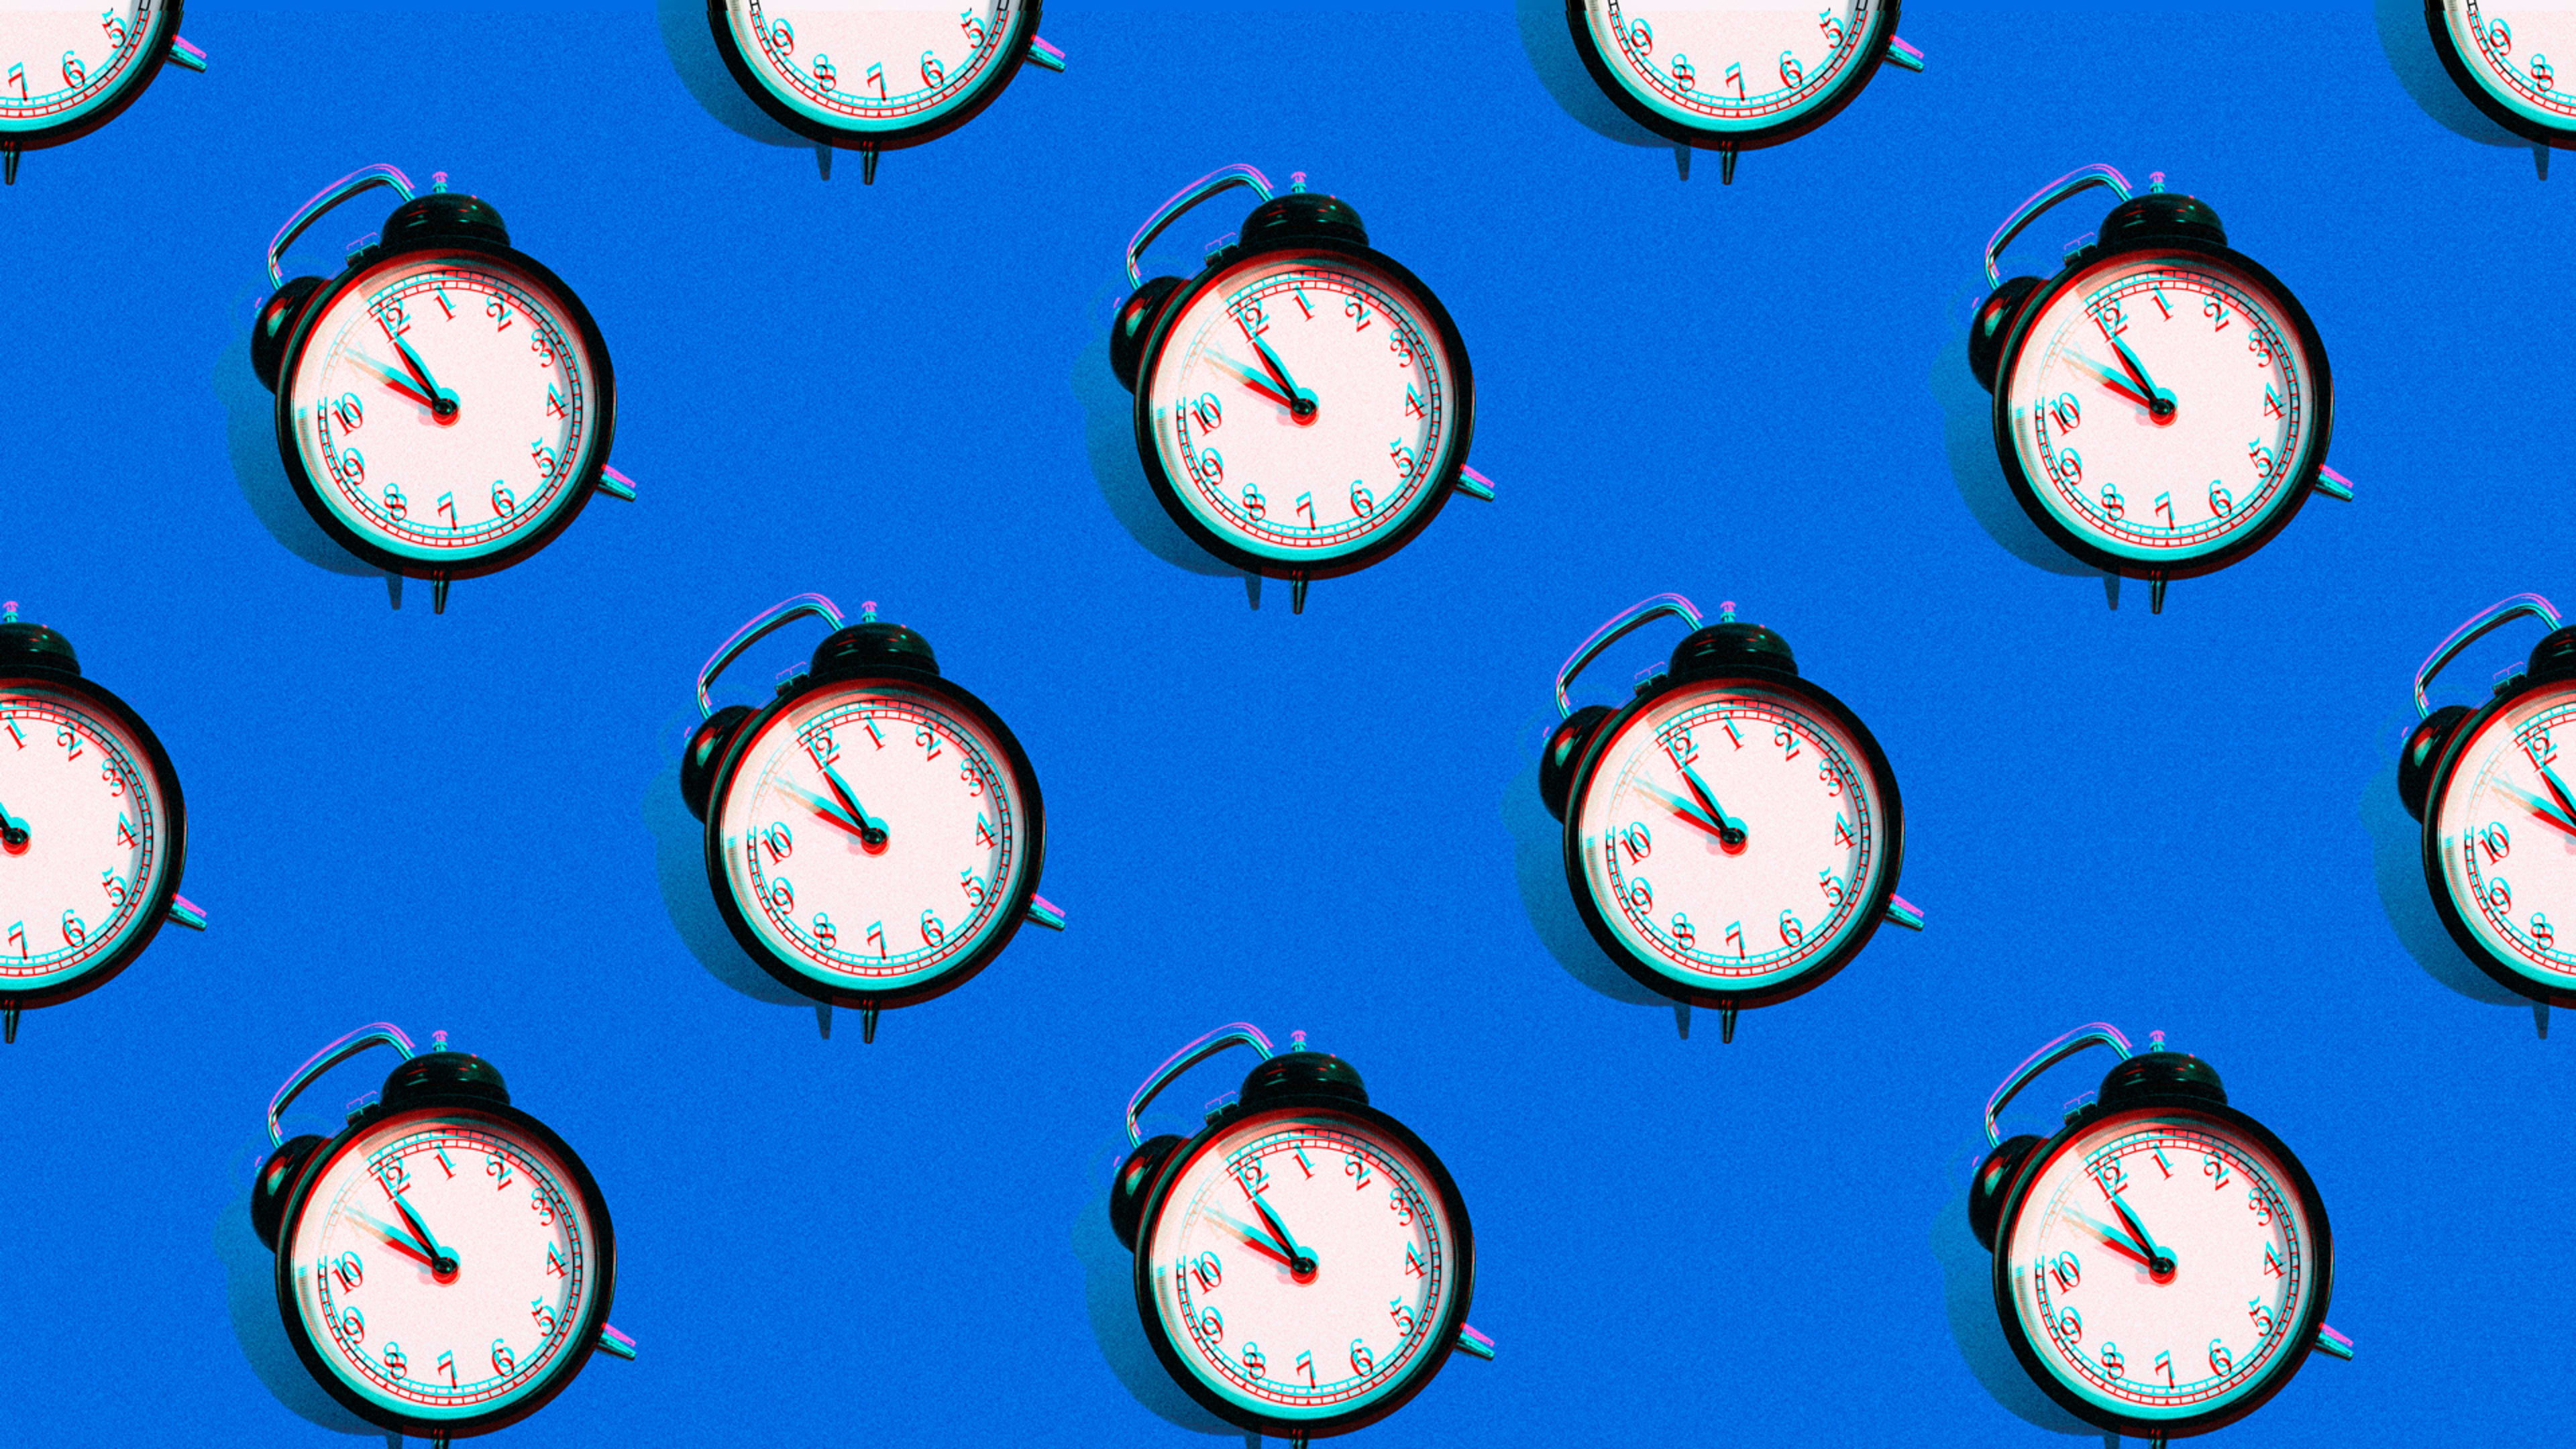 3 ways to improve your time management skills